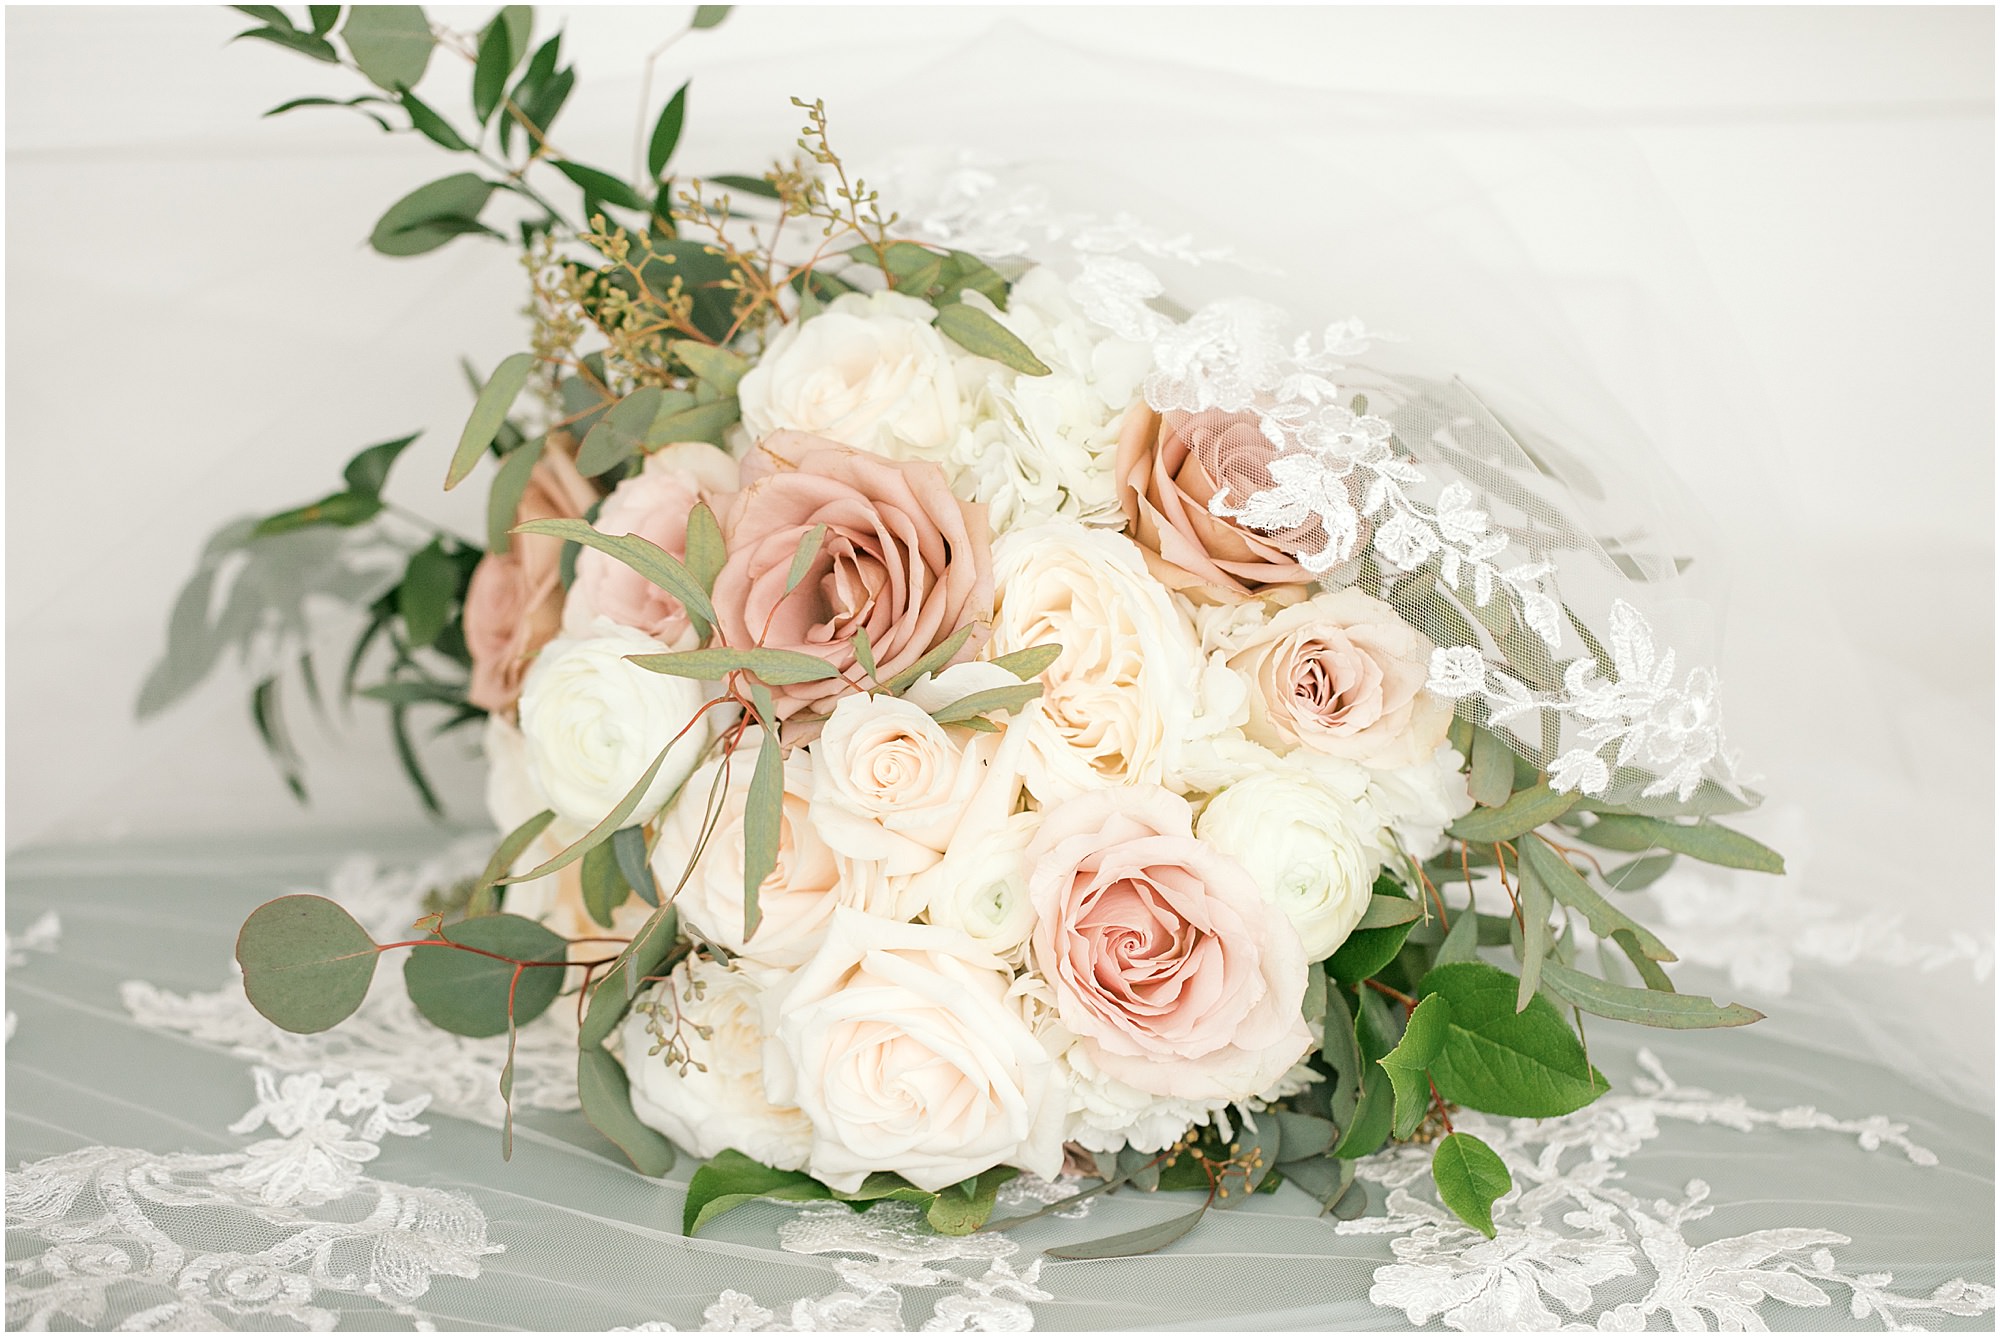 Dreamy wedding bouquet in shades of pinks and creams